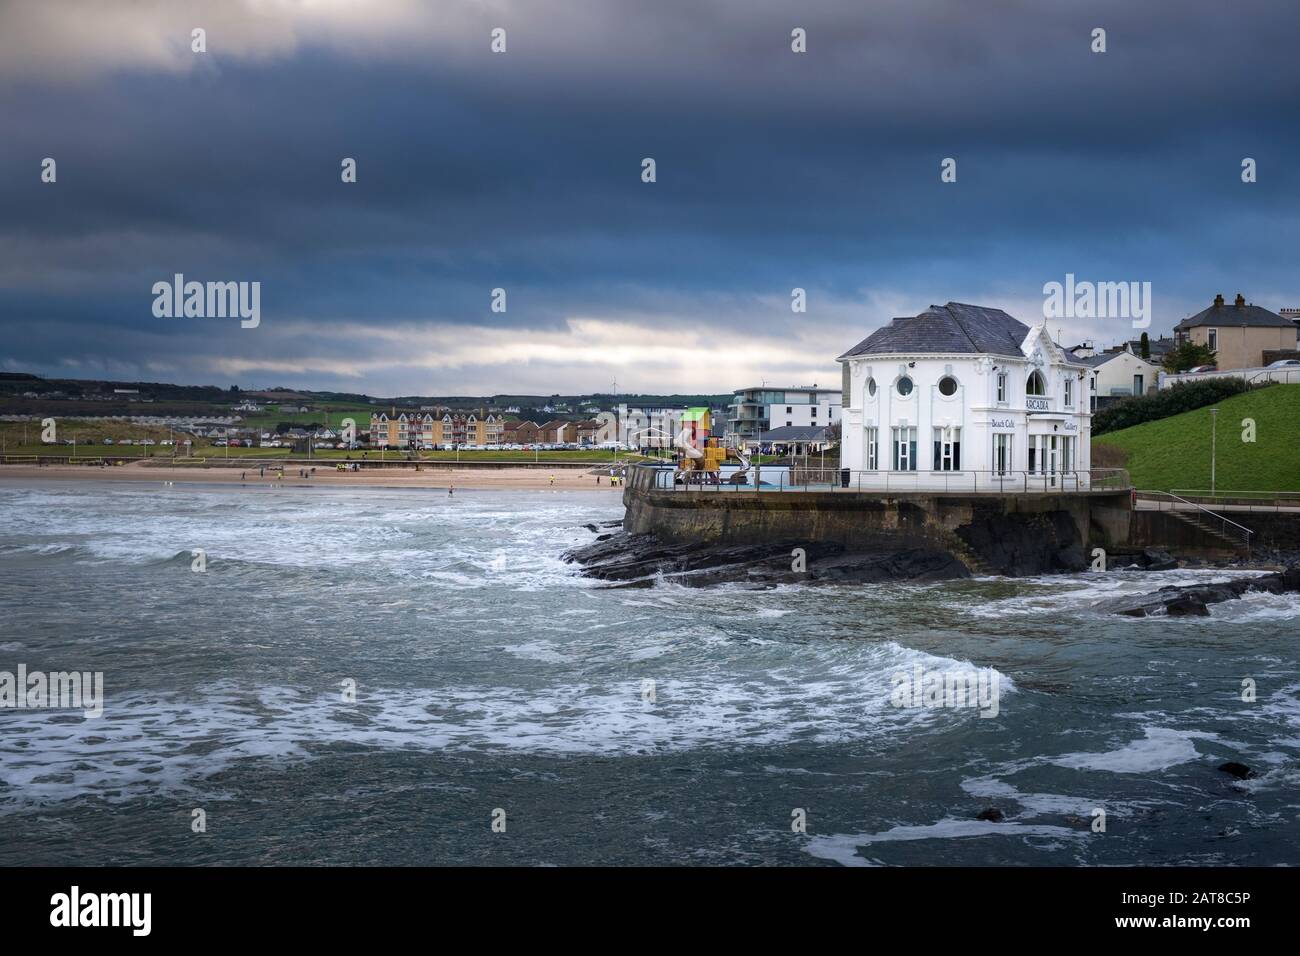 Arcadia ballroom and cafe by the beach known as East Strand in  Portrush on the Antrim Coast of Northern Ireland. Stock Photo